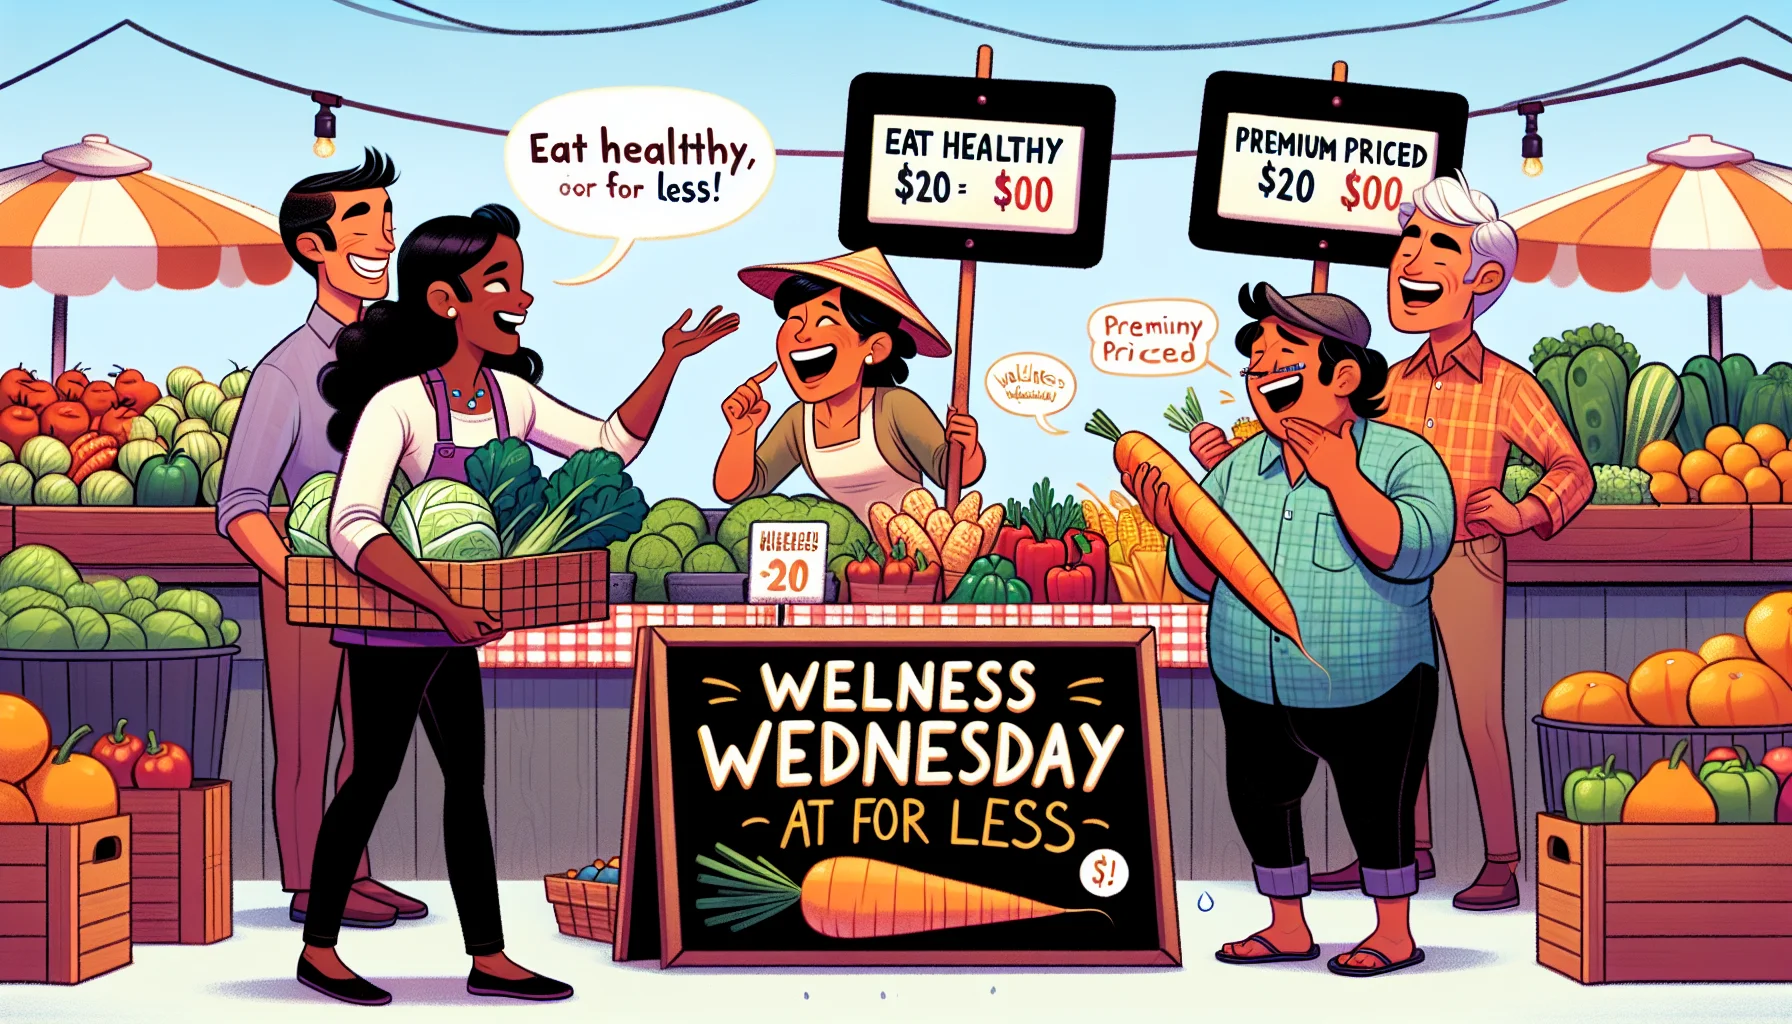 Create a comical illustration representing Wellness Wednesday tips. The image should depict a lively farmer's market with people from diverse descents like Black, Caucasian, and South Asian, intentionally choosing budget-friendly, healthy produce. An Asian woman is bargaining with a South Asian vendor over the price of organic vegetables, with a sign reading 'Wellness Wednesday: Eat Healthy for Less'. Nearby, a Caucasian man is laughing while holding a huge carrot and comparing it to a premium priced bag of chips. The atmosphere is jovial, light-hearted, and encouraging the idea of cost-effective healthful choices.